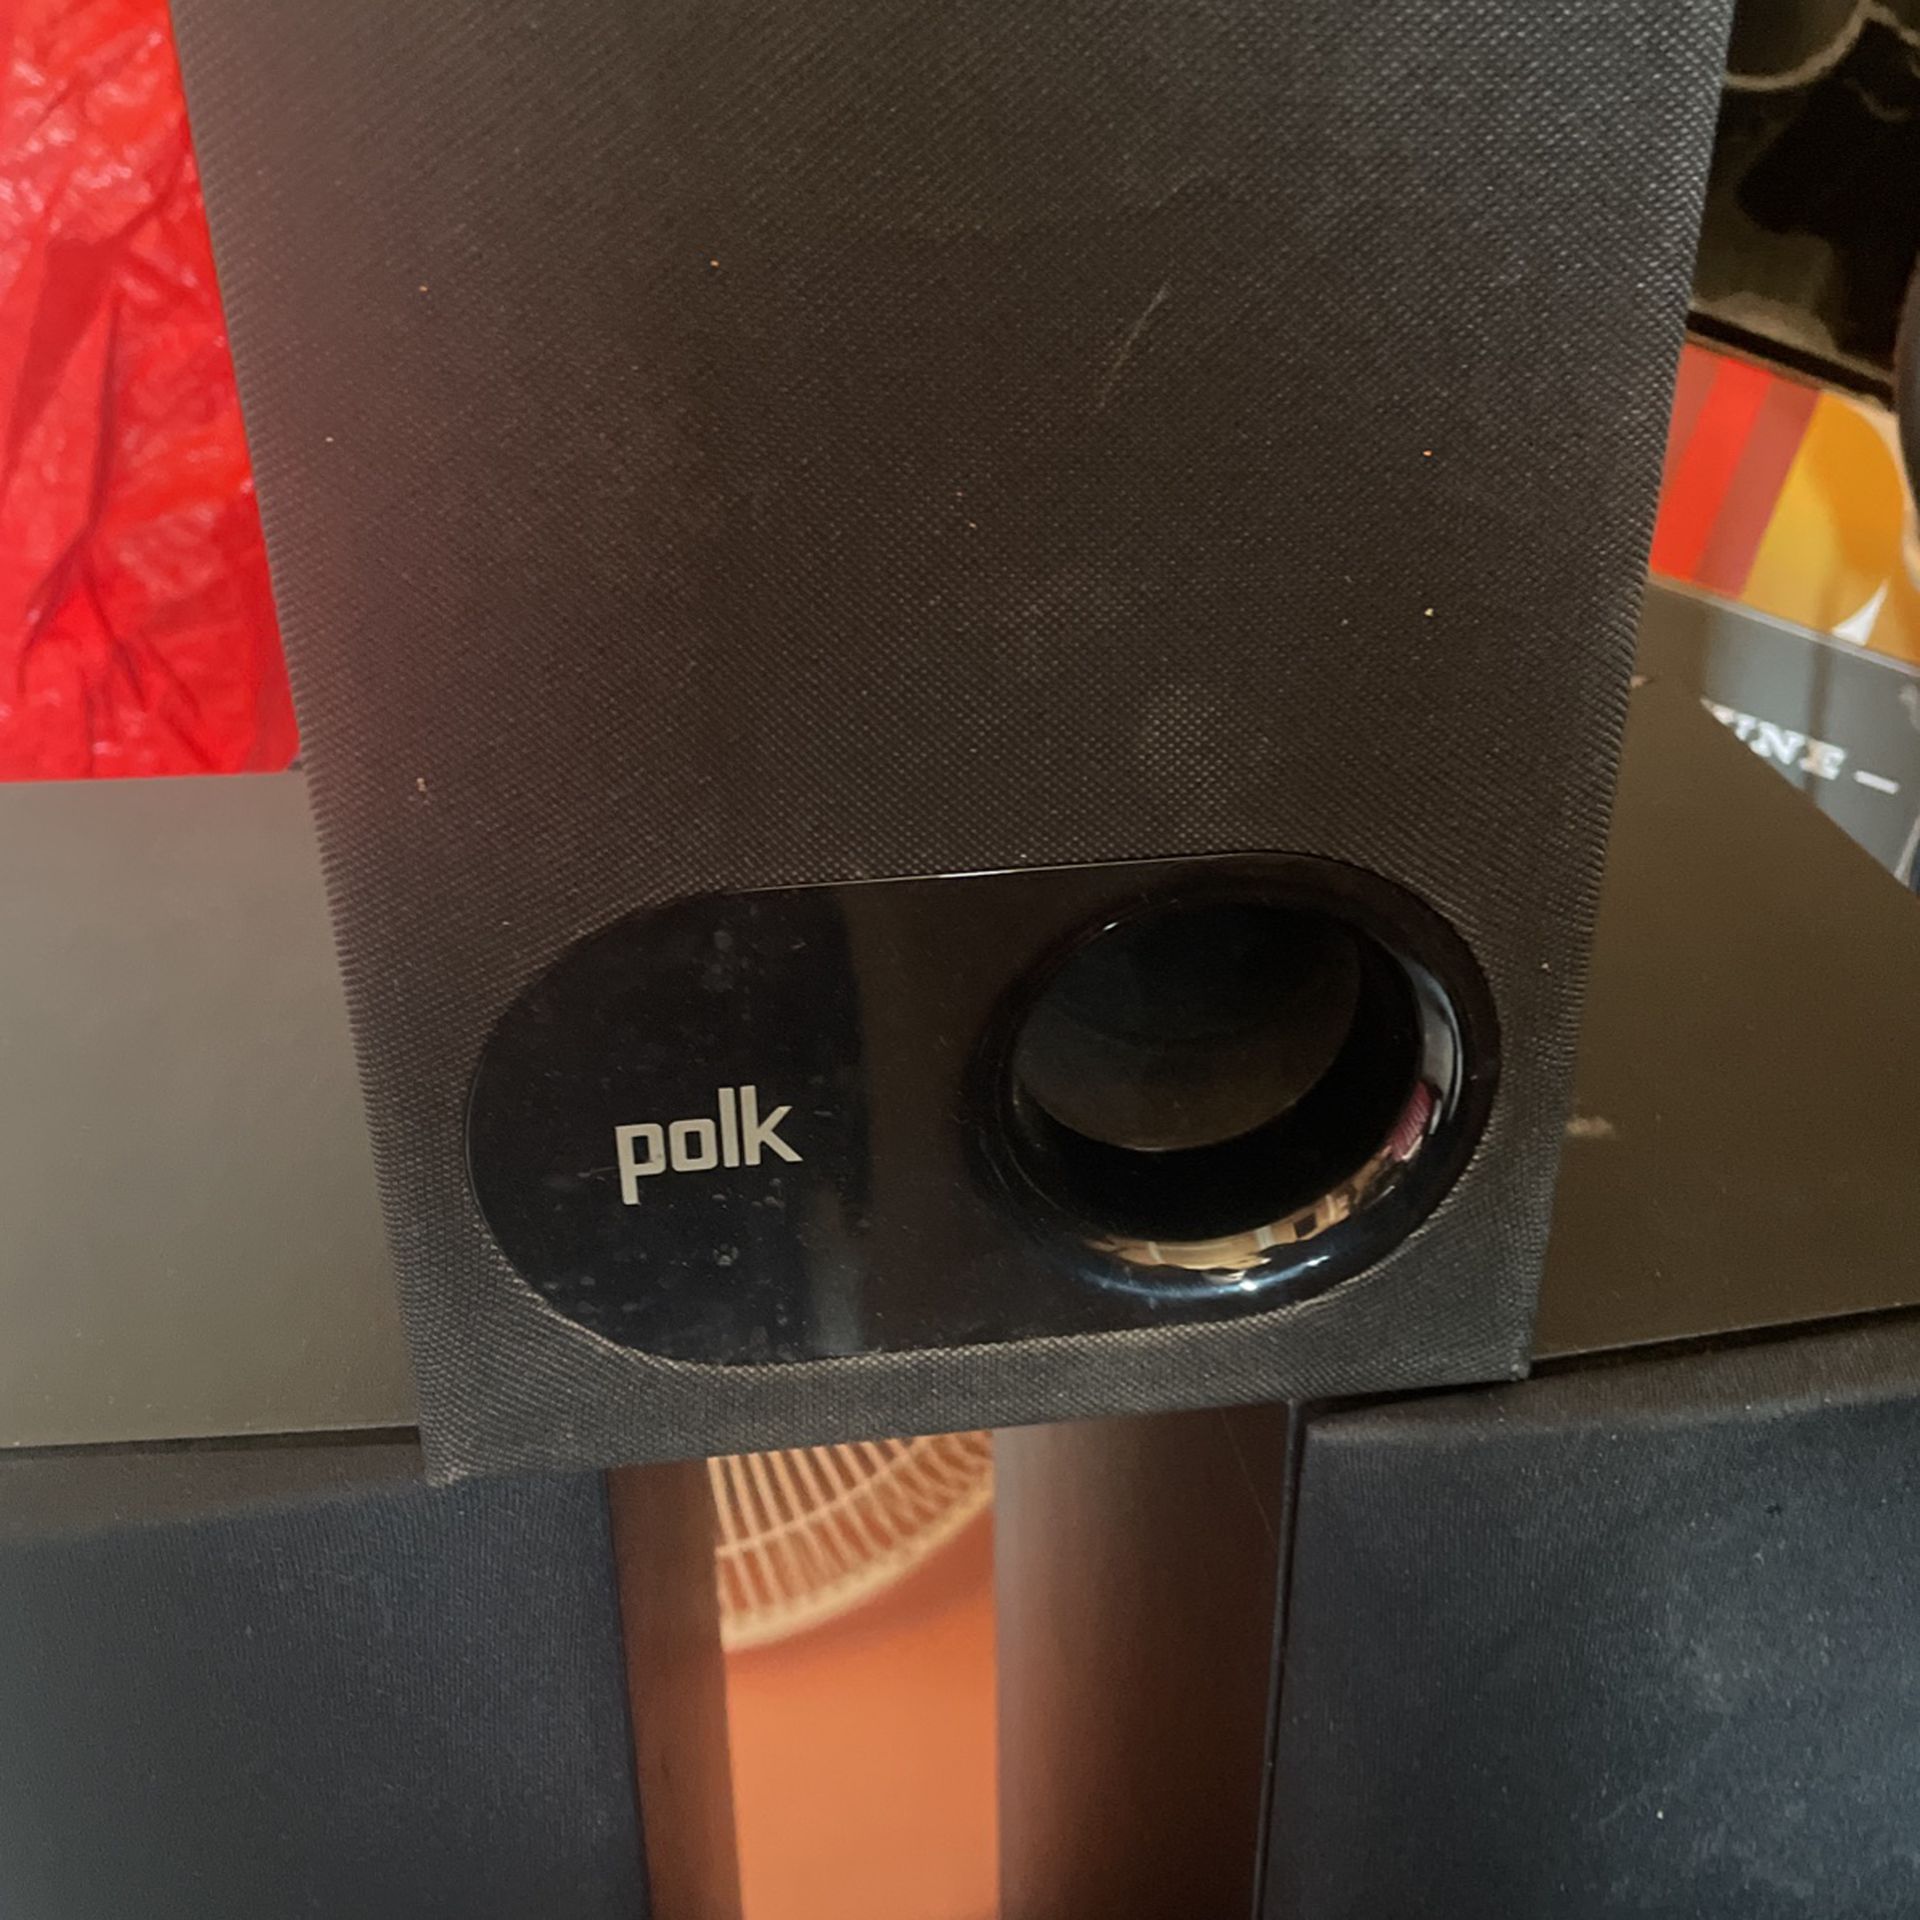 Polk Audio Towers And Subwoofer $120